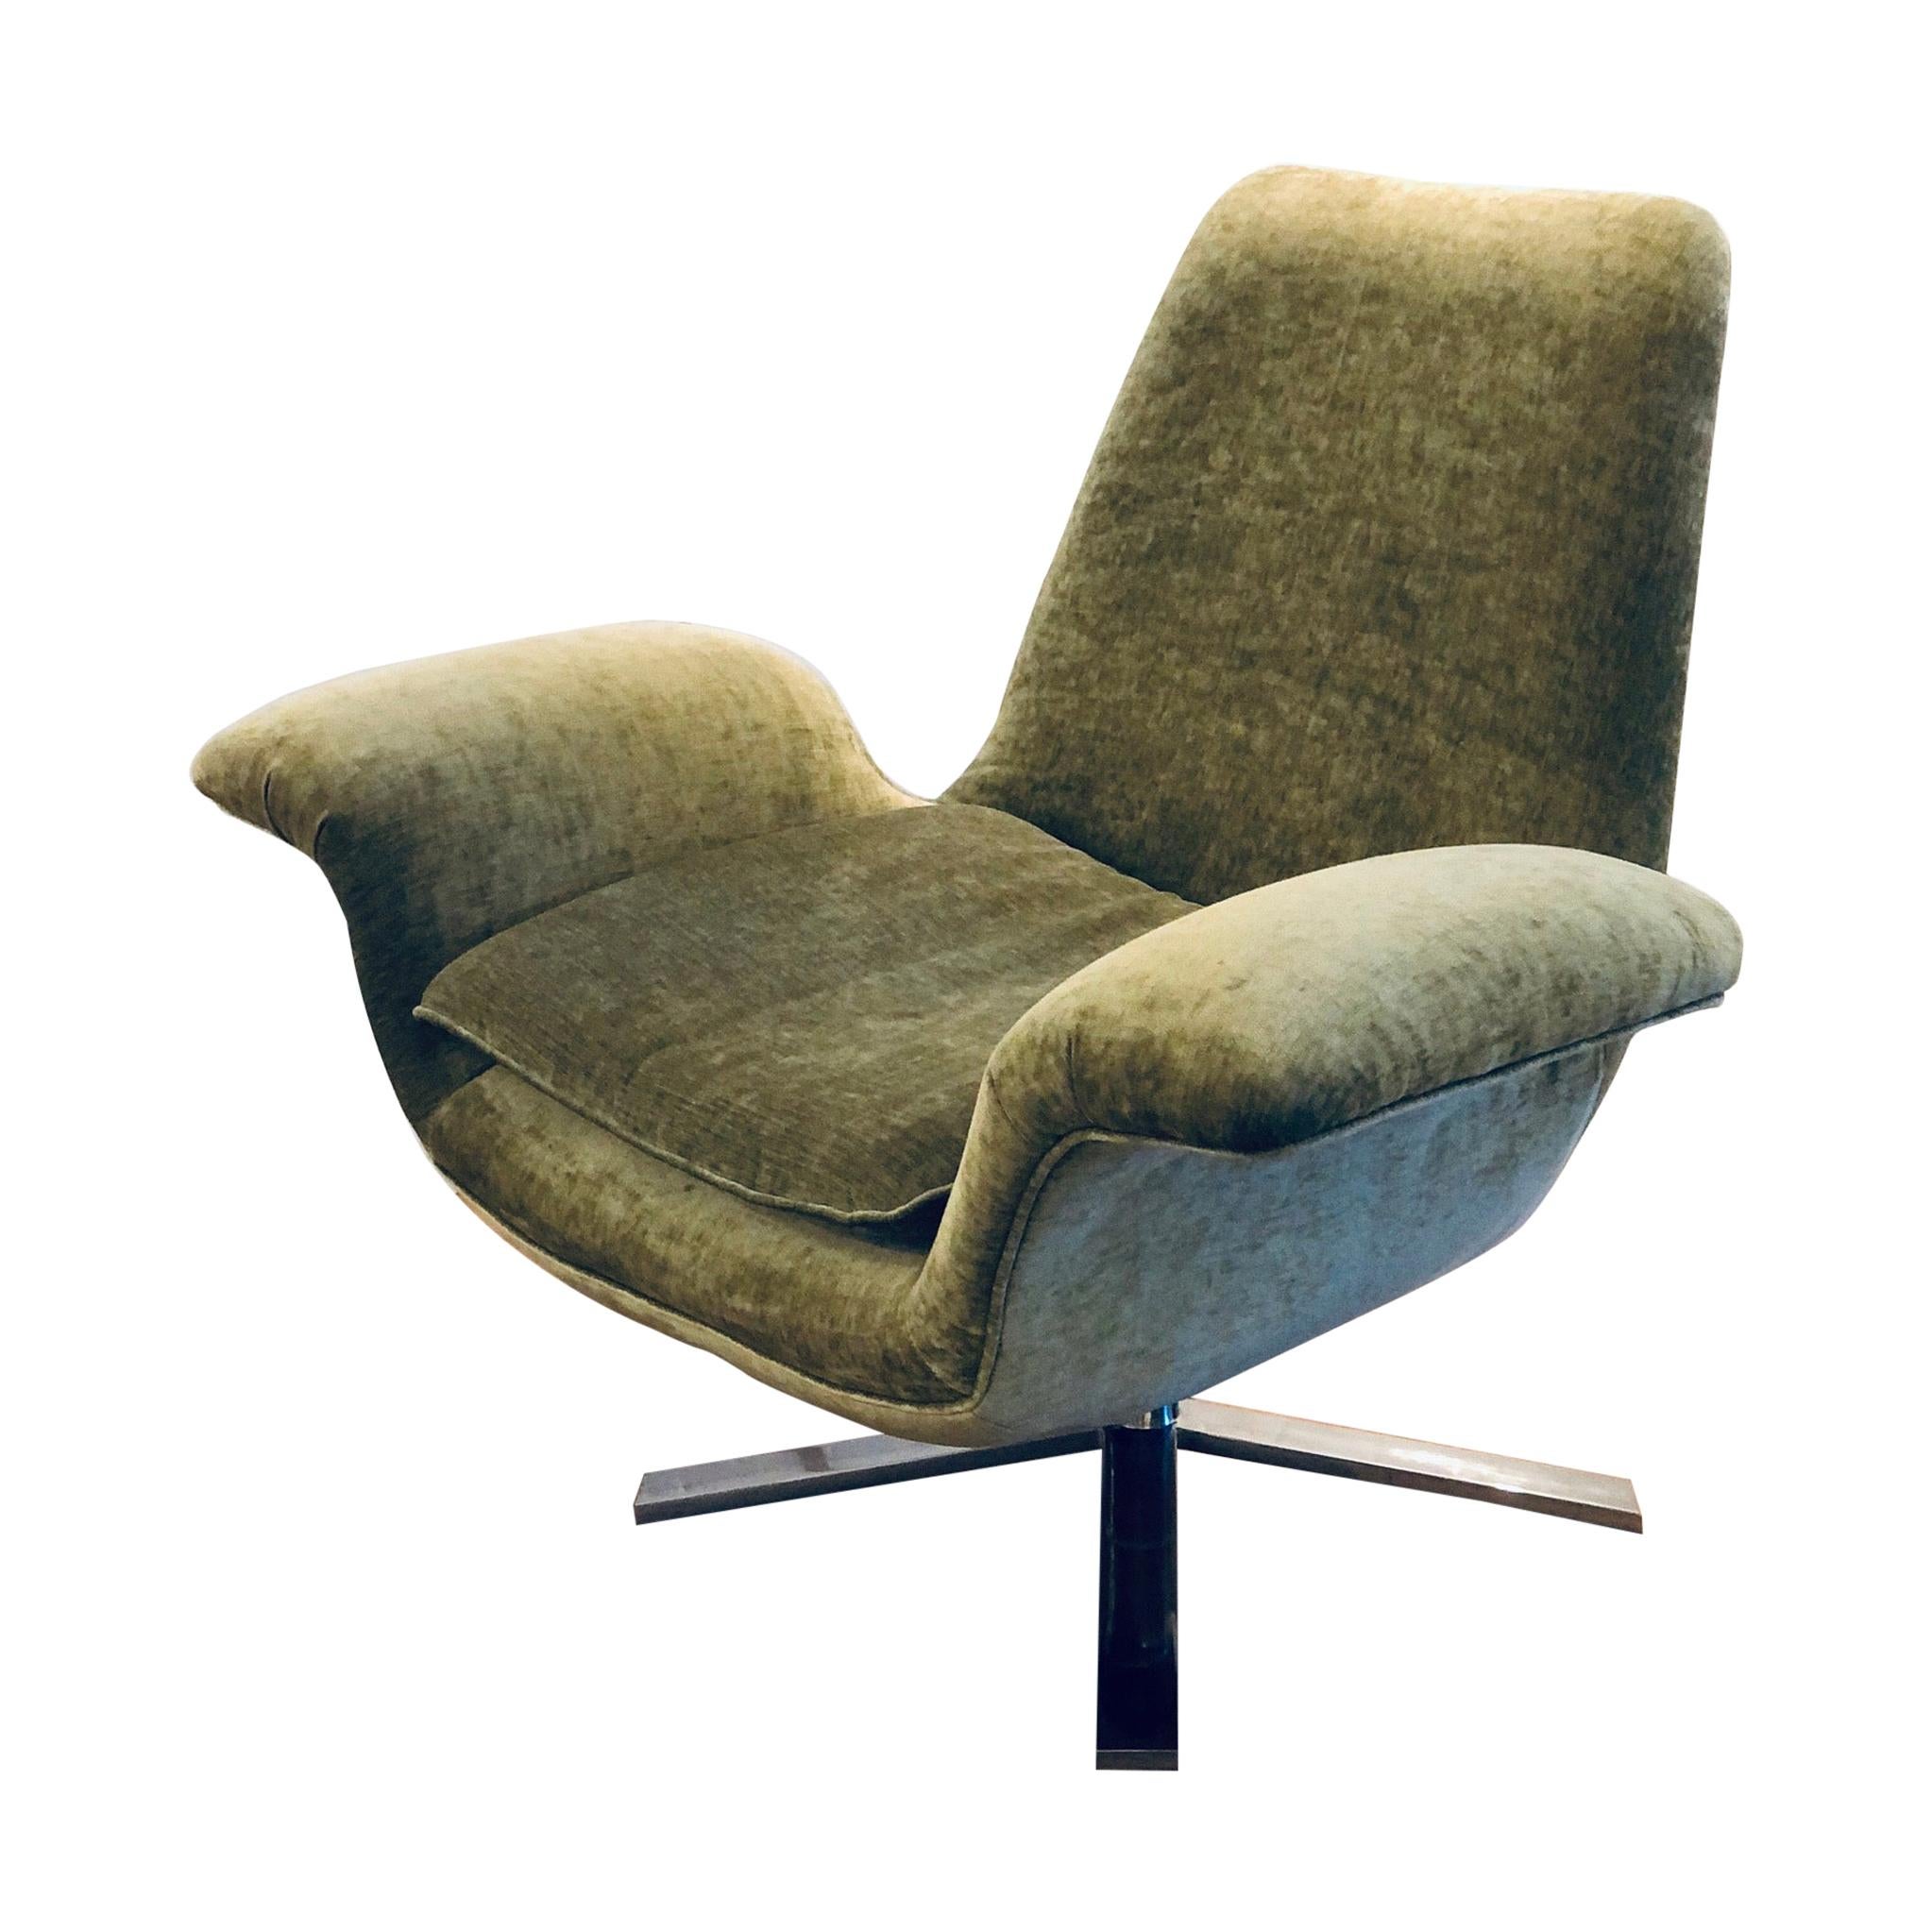 Striking Single Contemporay Lounge Open Chair by Lilly Jack